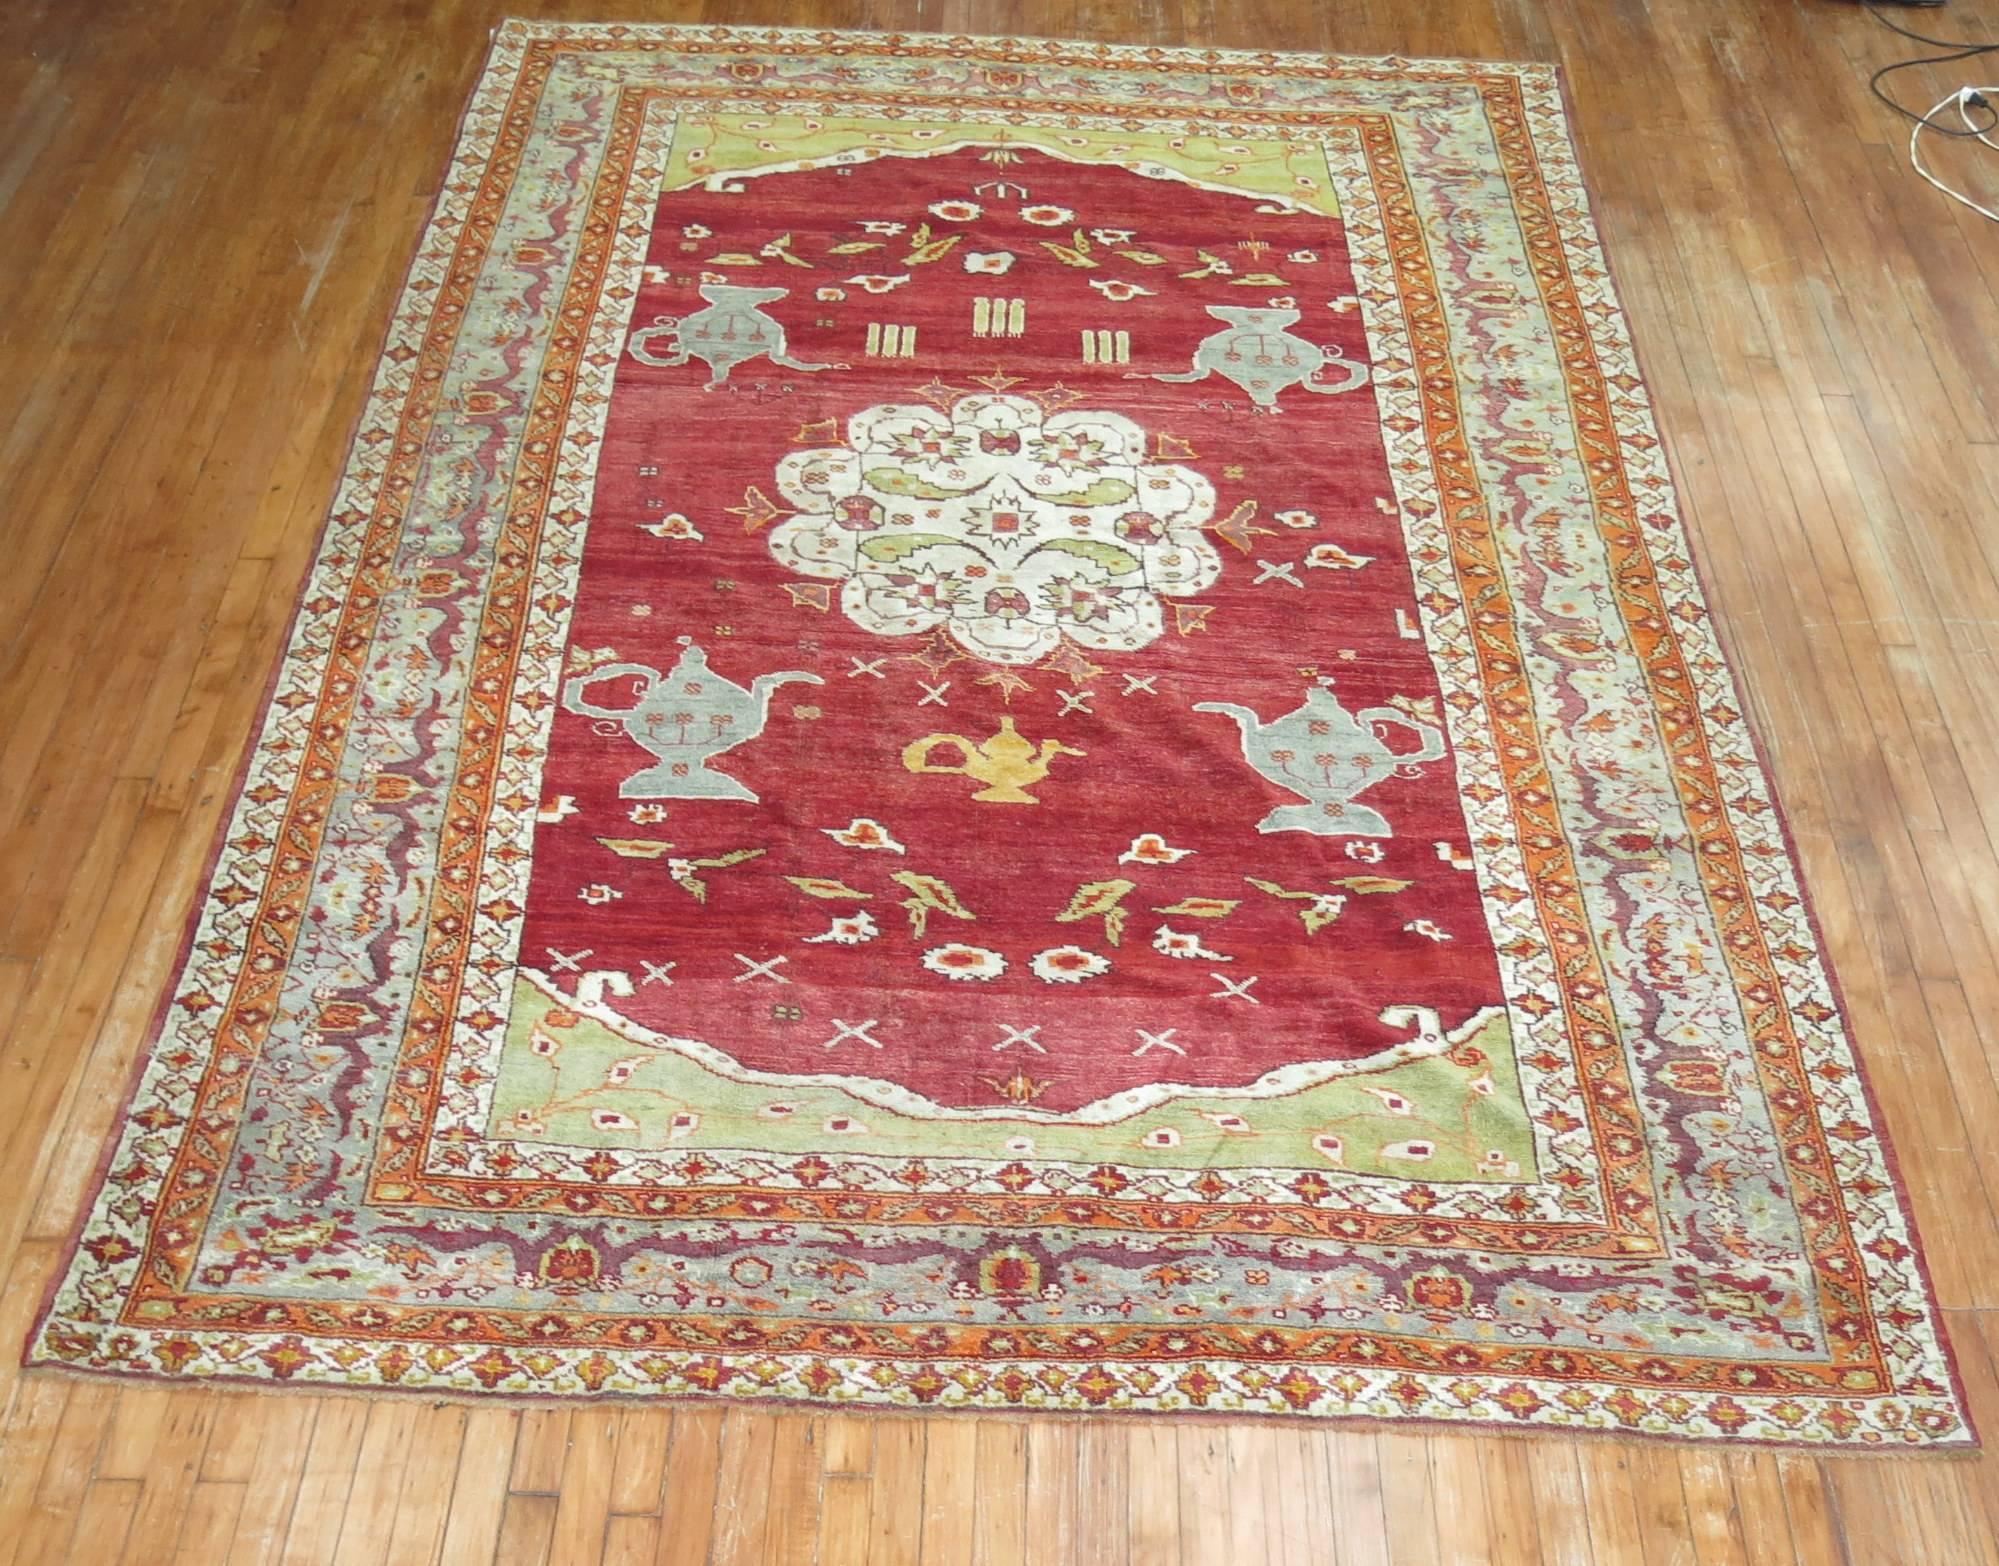 An early 20th century Turkish Oushak rug. 4 teapots on a rich cherry color field, accents in lime green, gray , and orange

Measures: 7'5